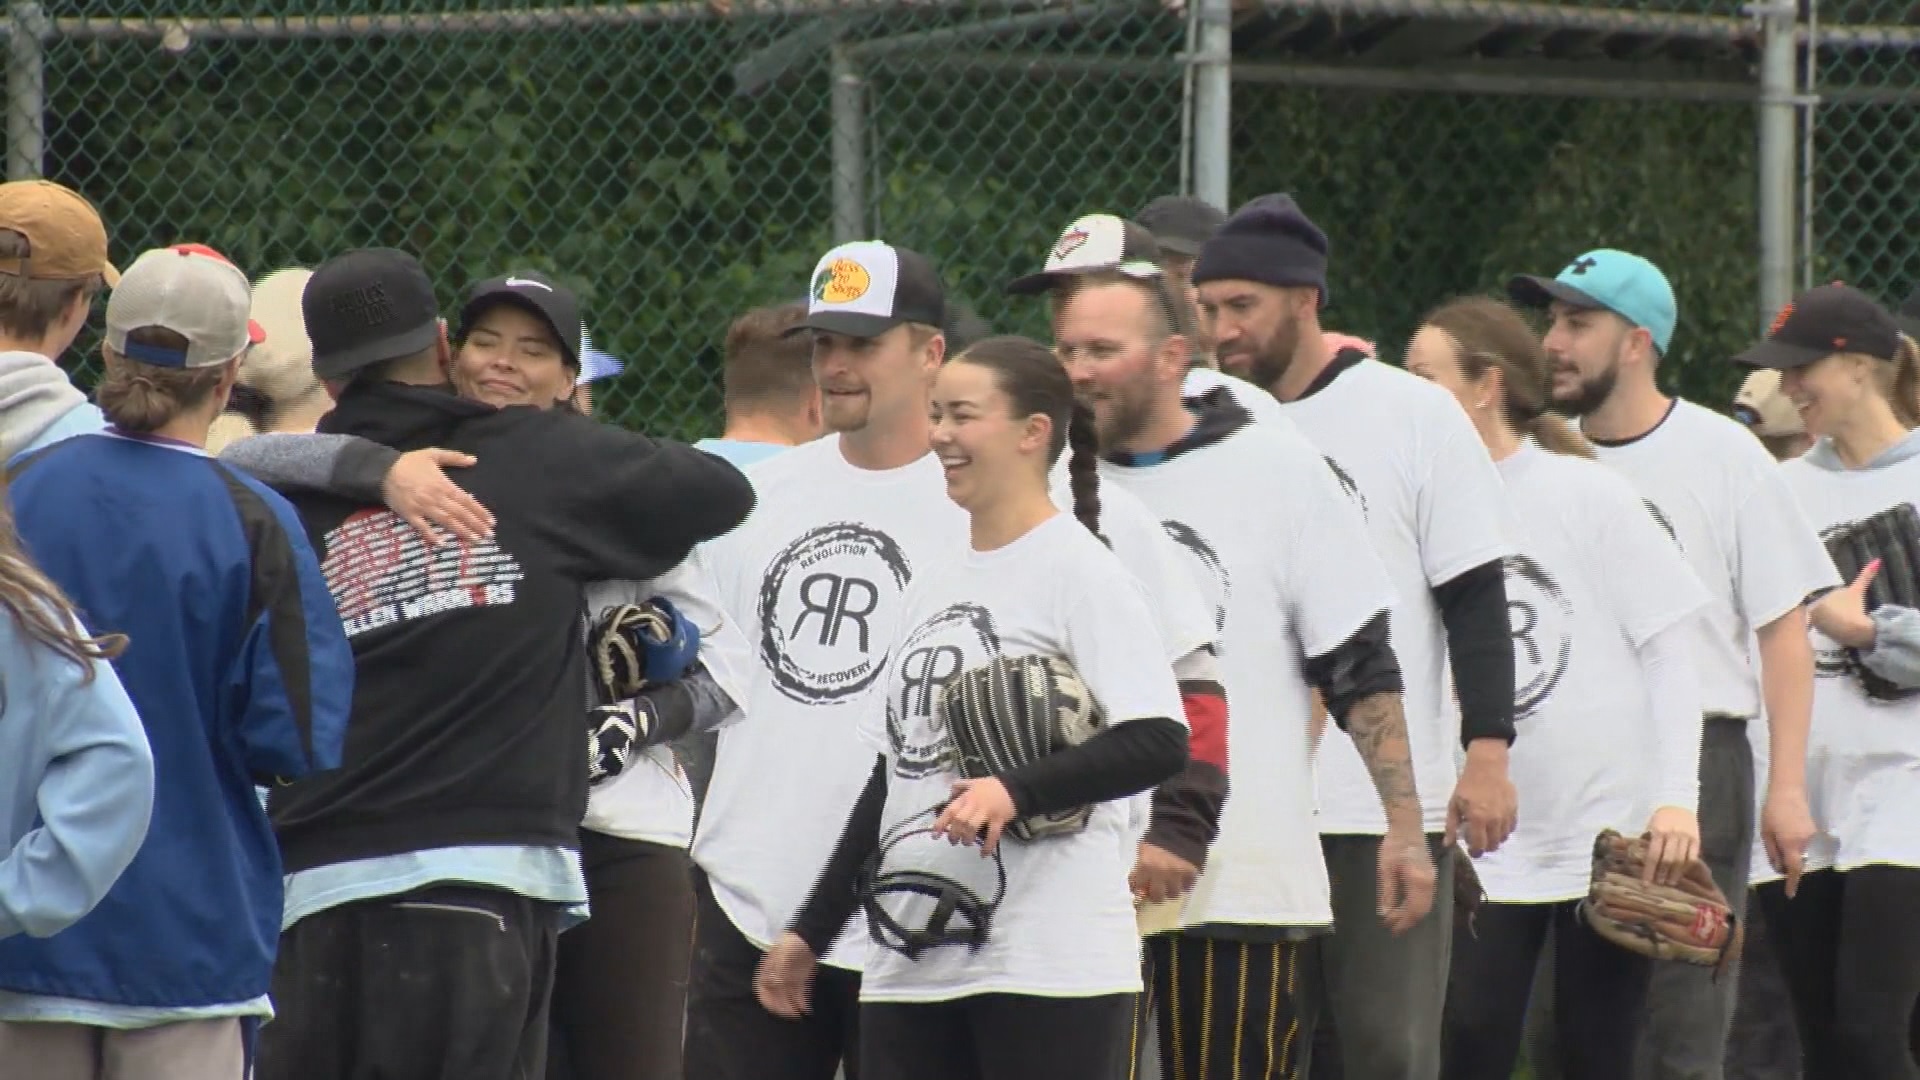 ‘We build family’: B.C. slo-pitch tournament highlights addiction recovery community